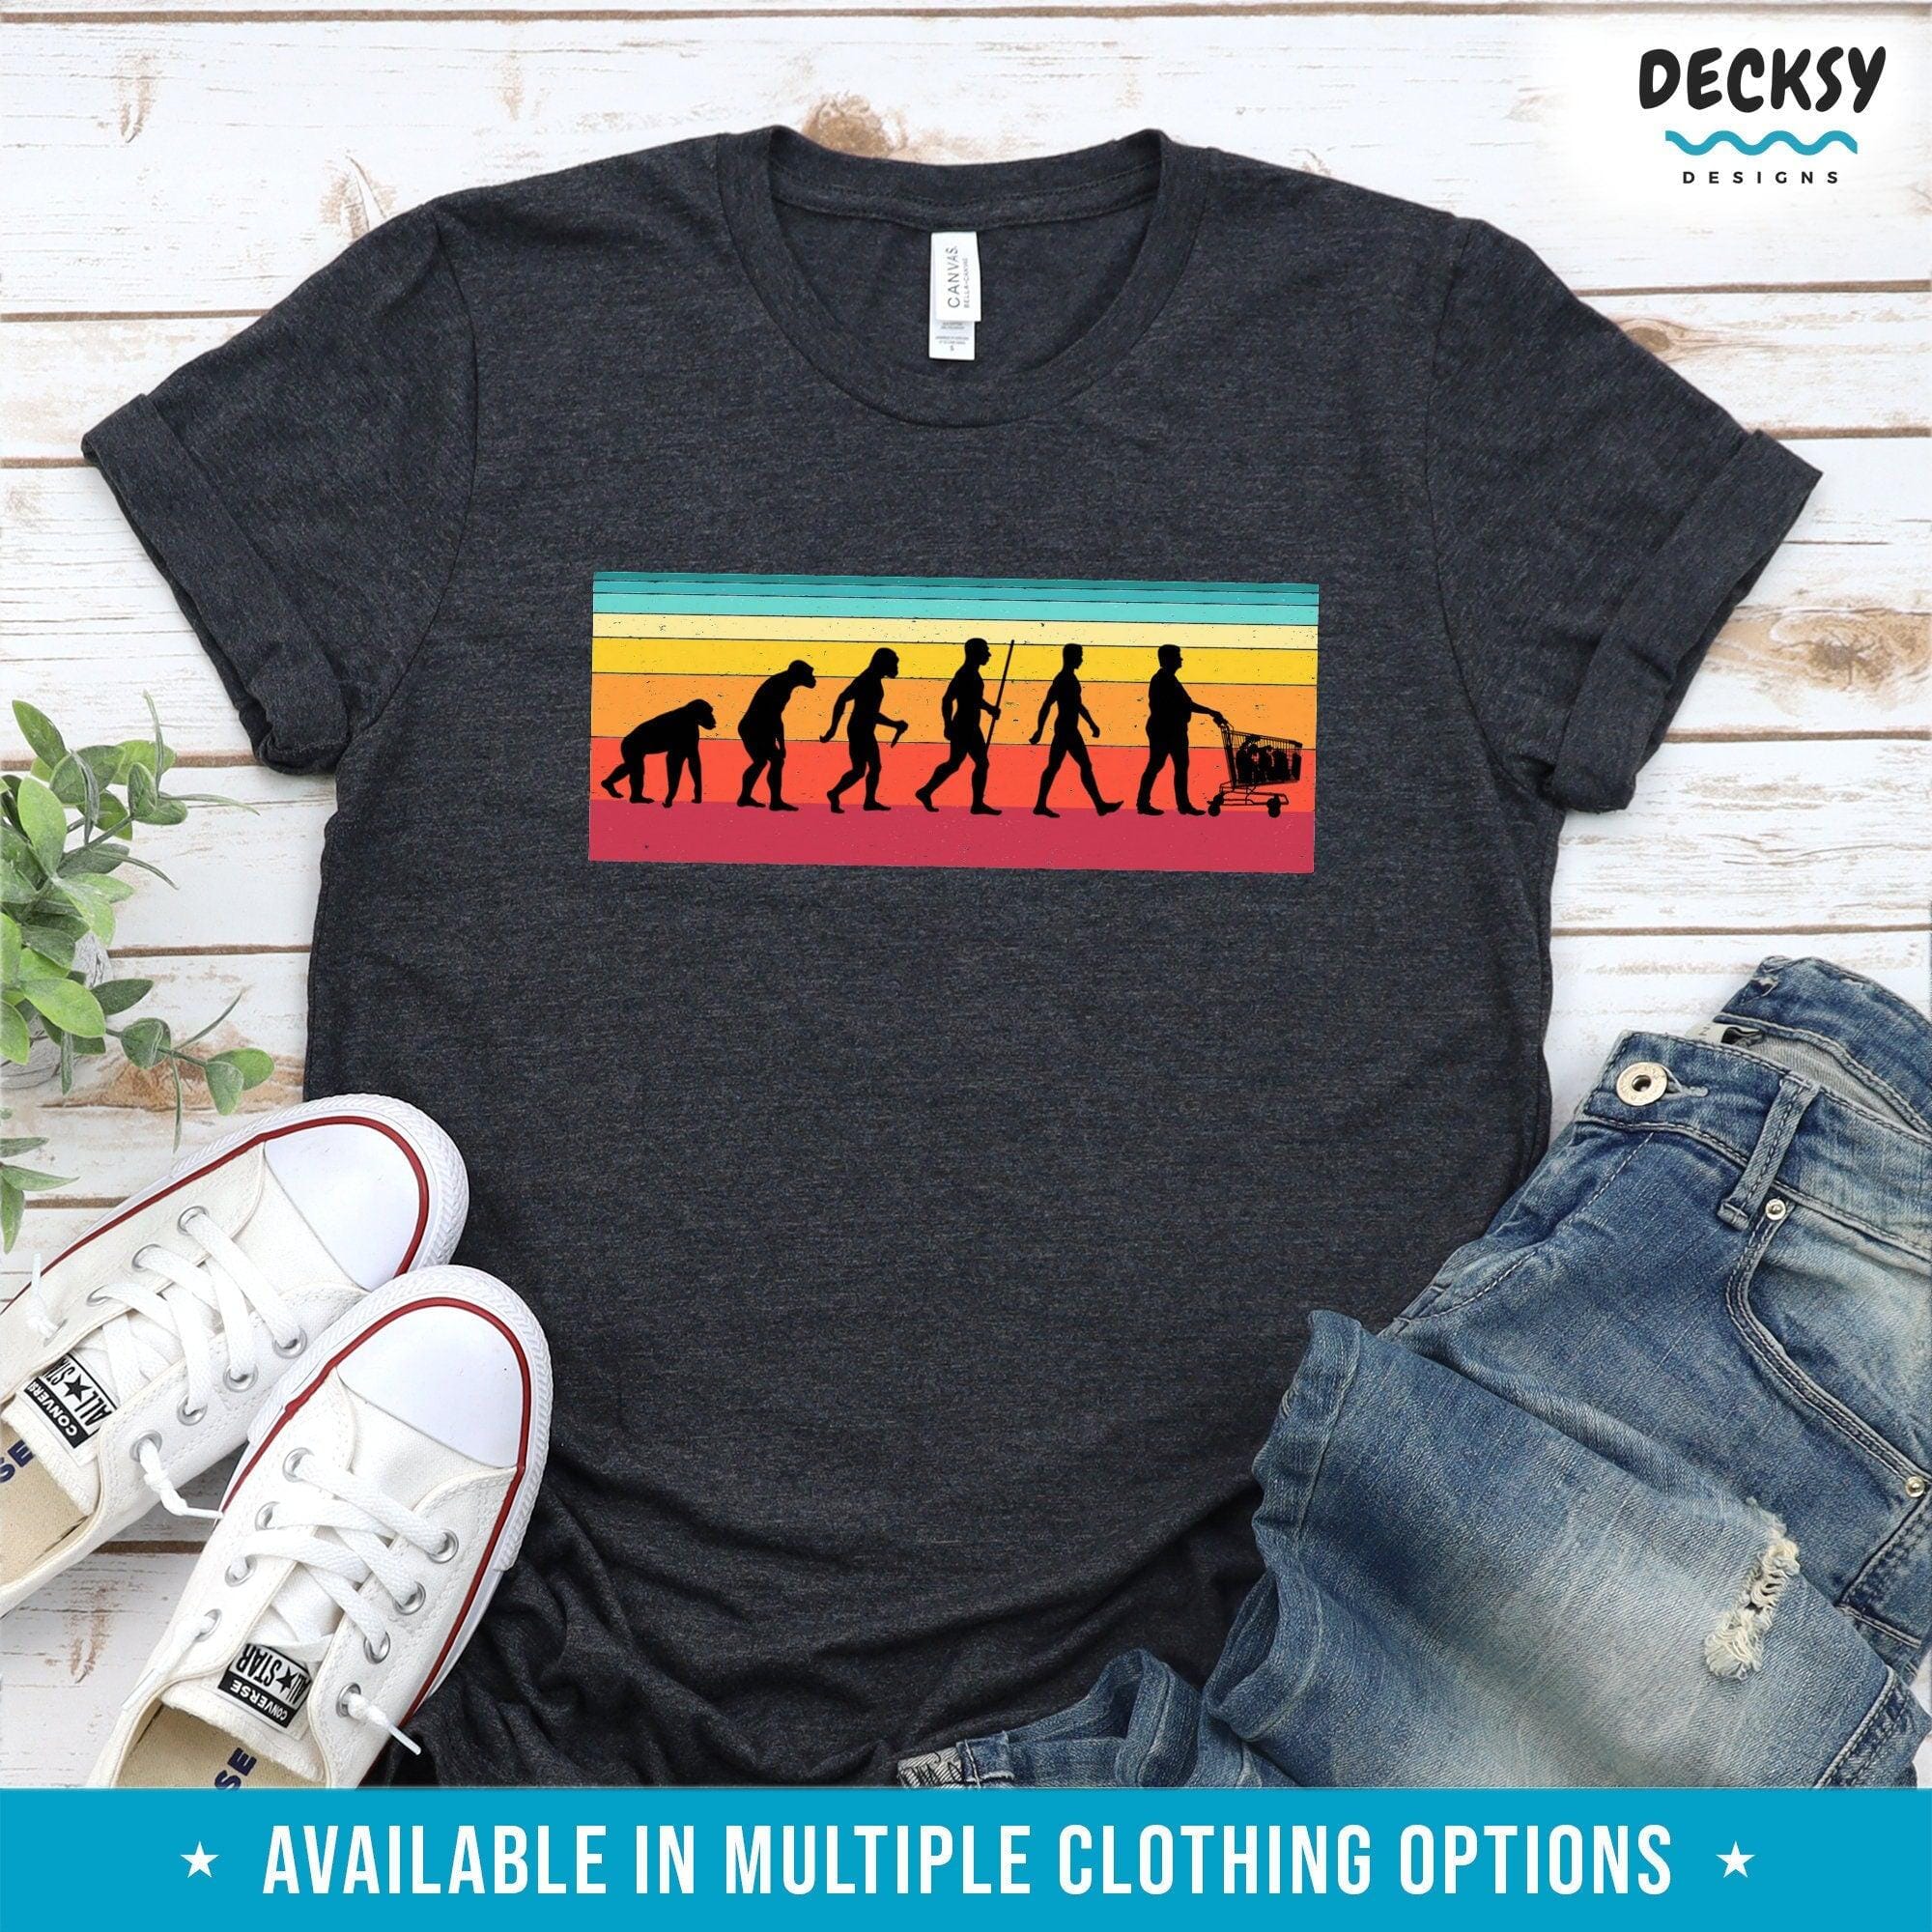 Shopper Evolution Shirt, Funny Gift For Men-Clothing:Gender-Neutral Adult Clothing:Tops & Tees:T-shirts:Graphic Tees-DecksyDesigns